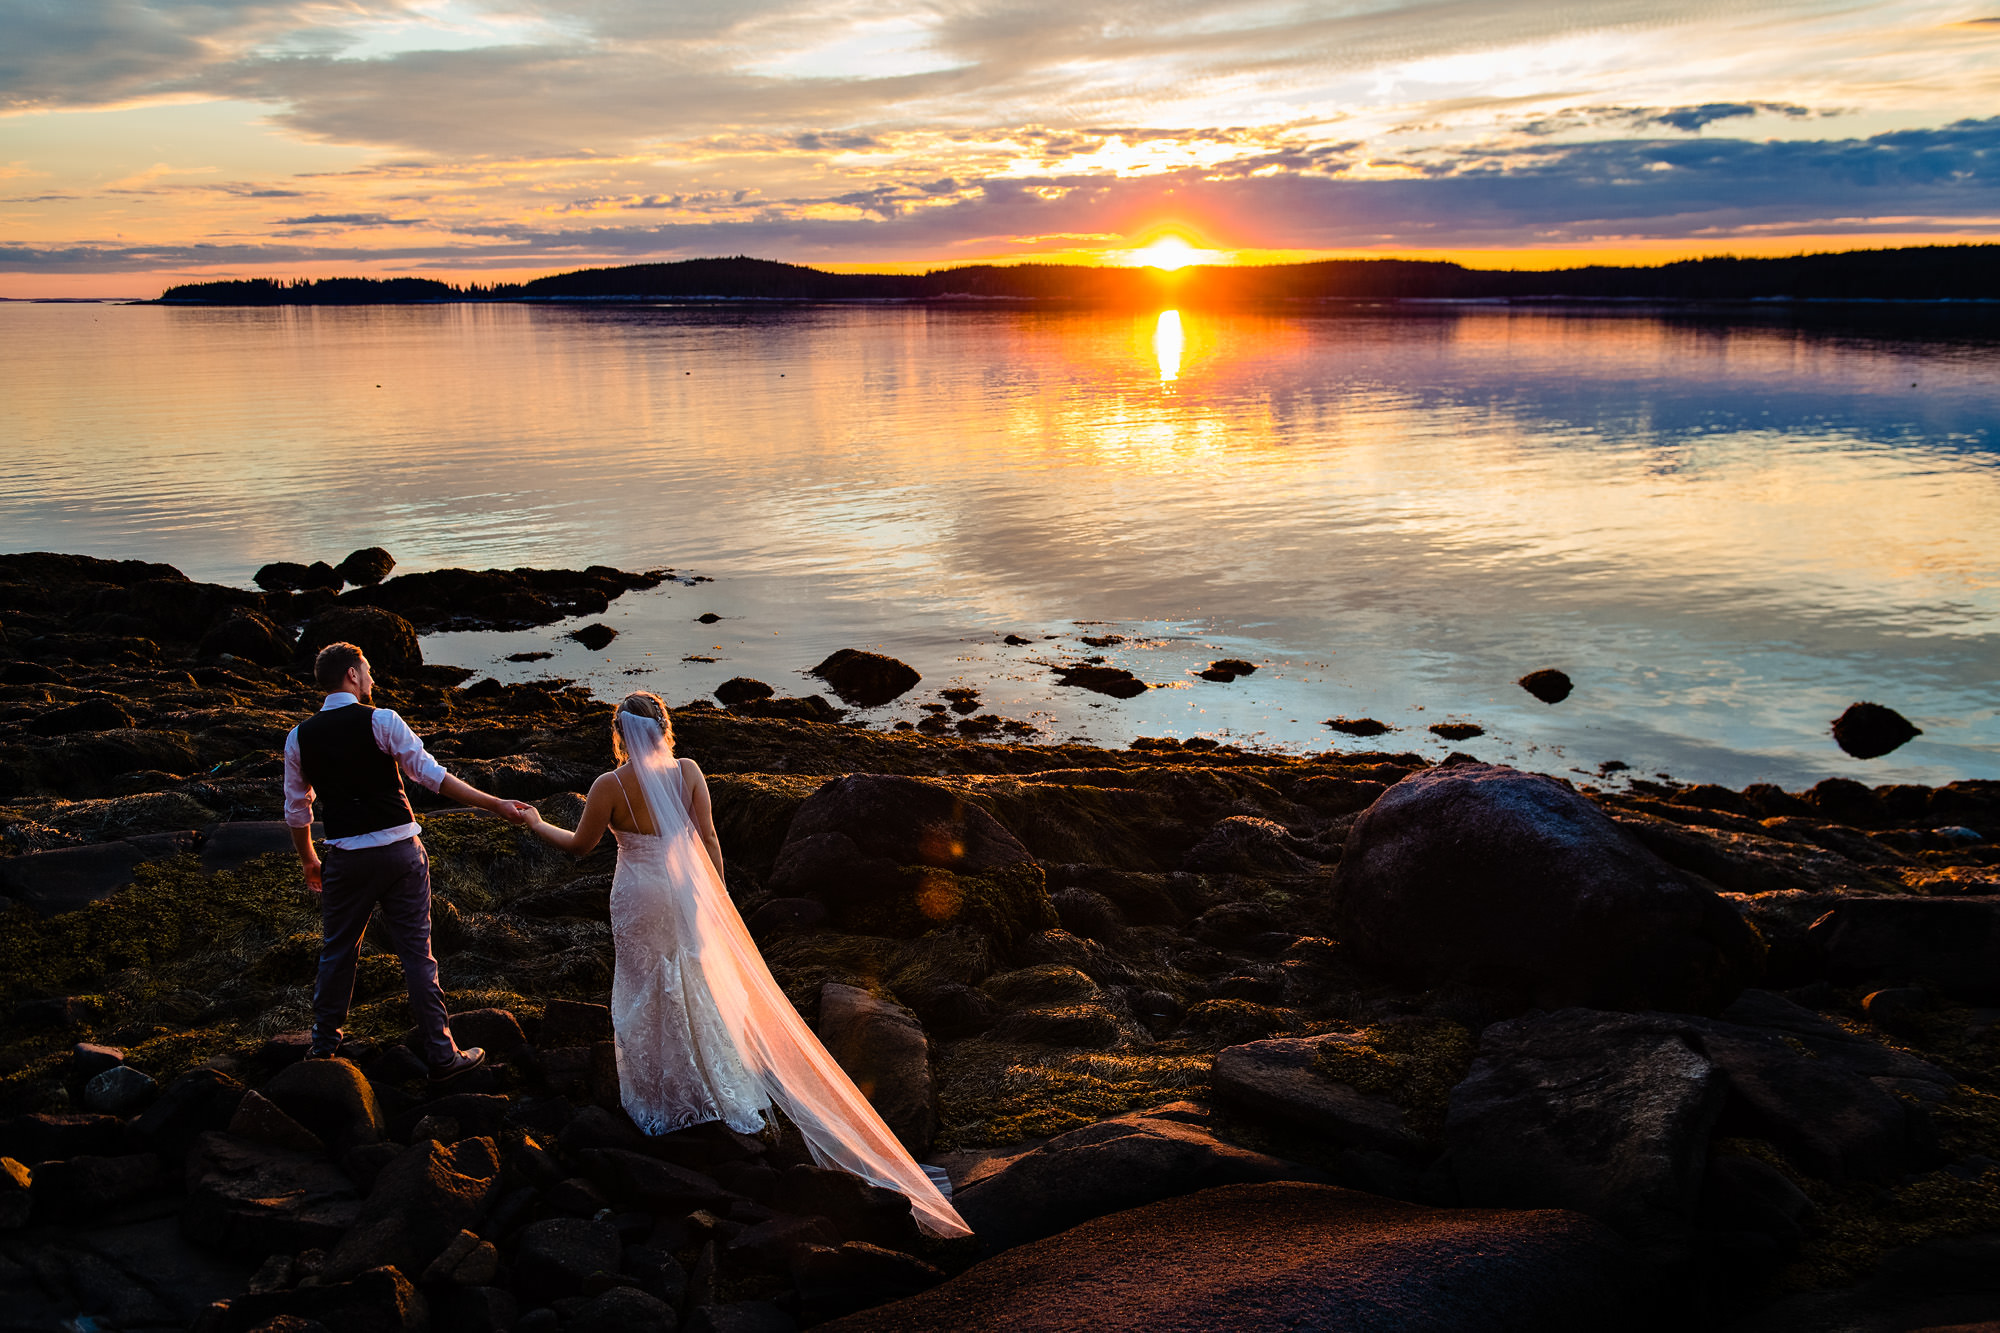 A wedding couple watch the sunset on Swans Island, Maine